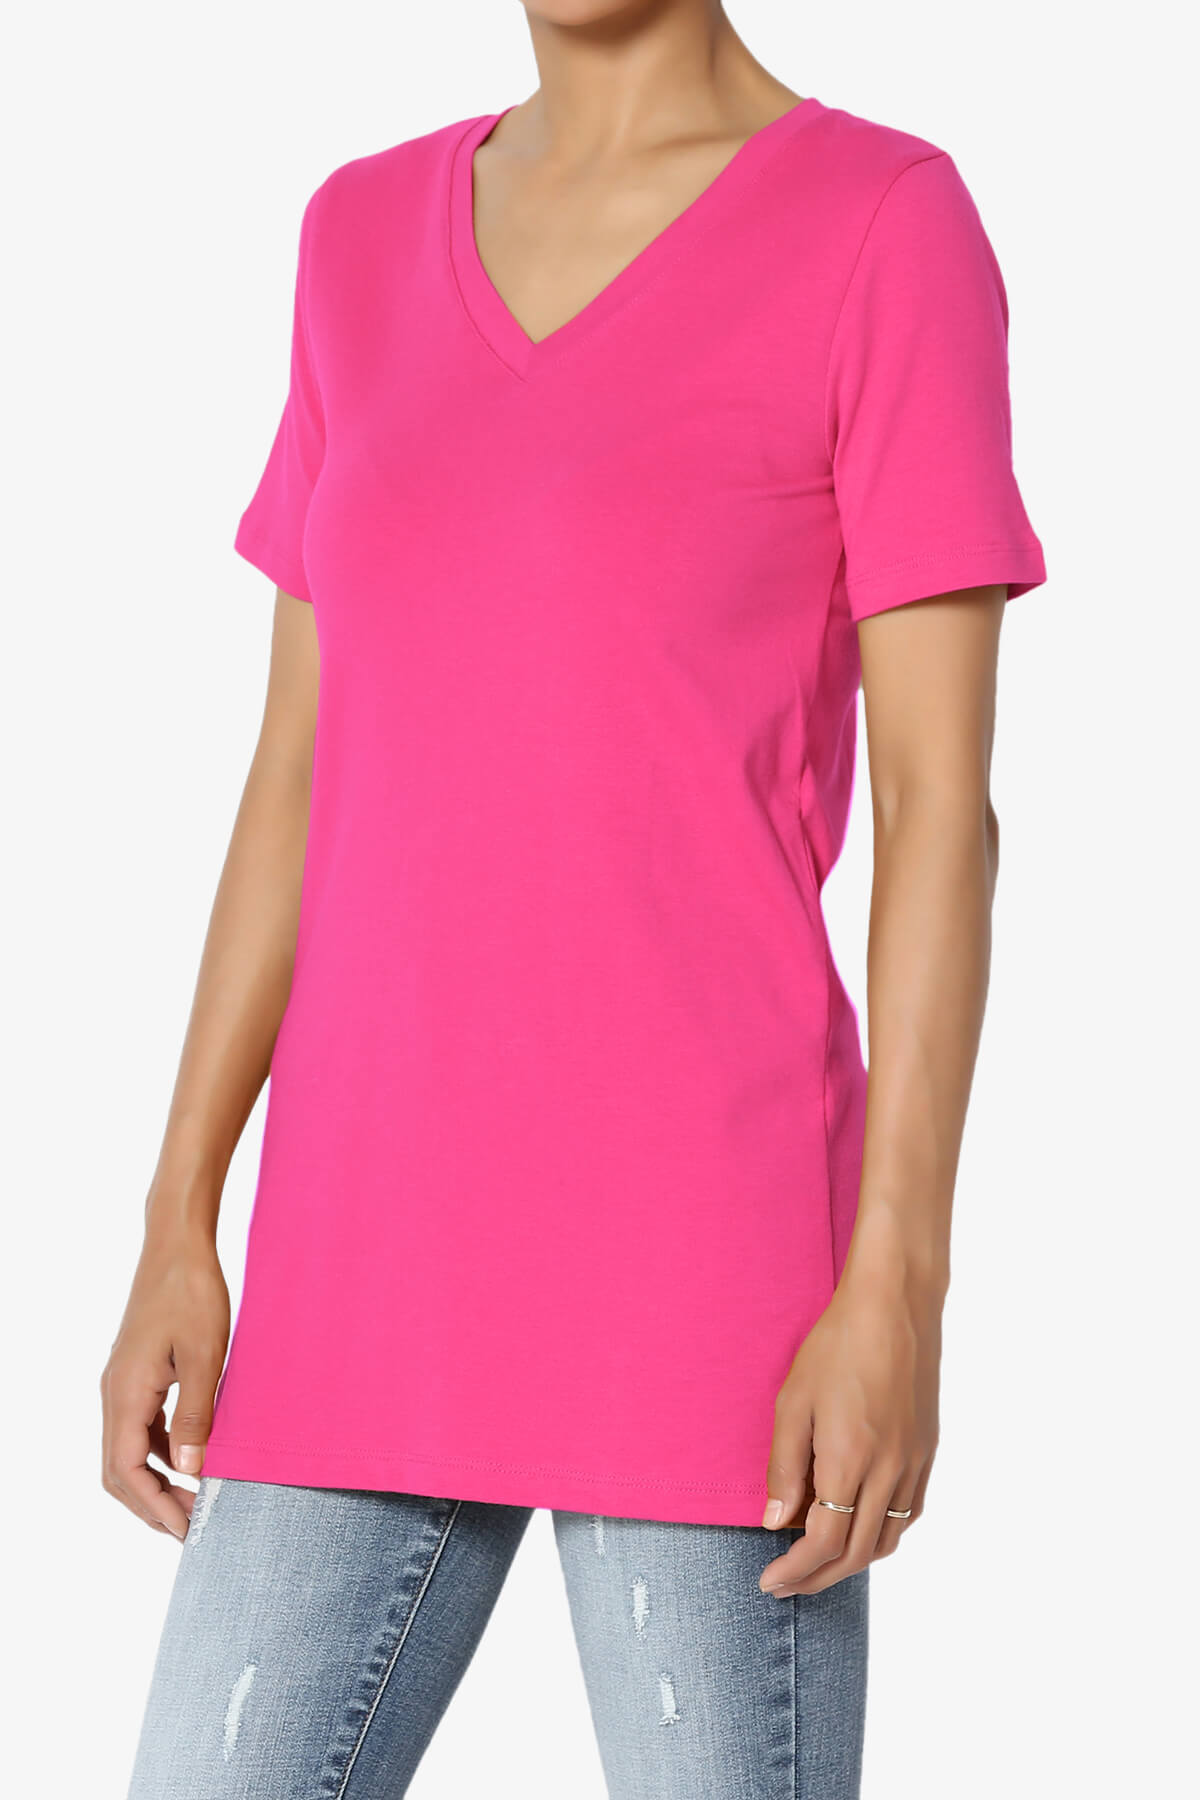 Load image into Gallery viewer, Elora V-Neck Short Sleeve T-Shirt HOT PINK_3
